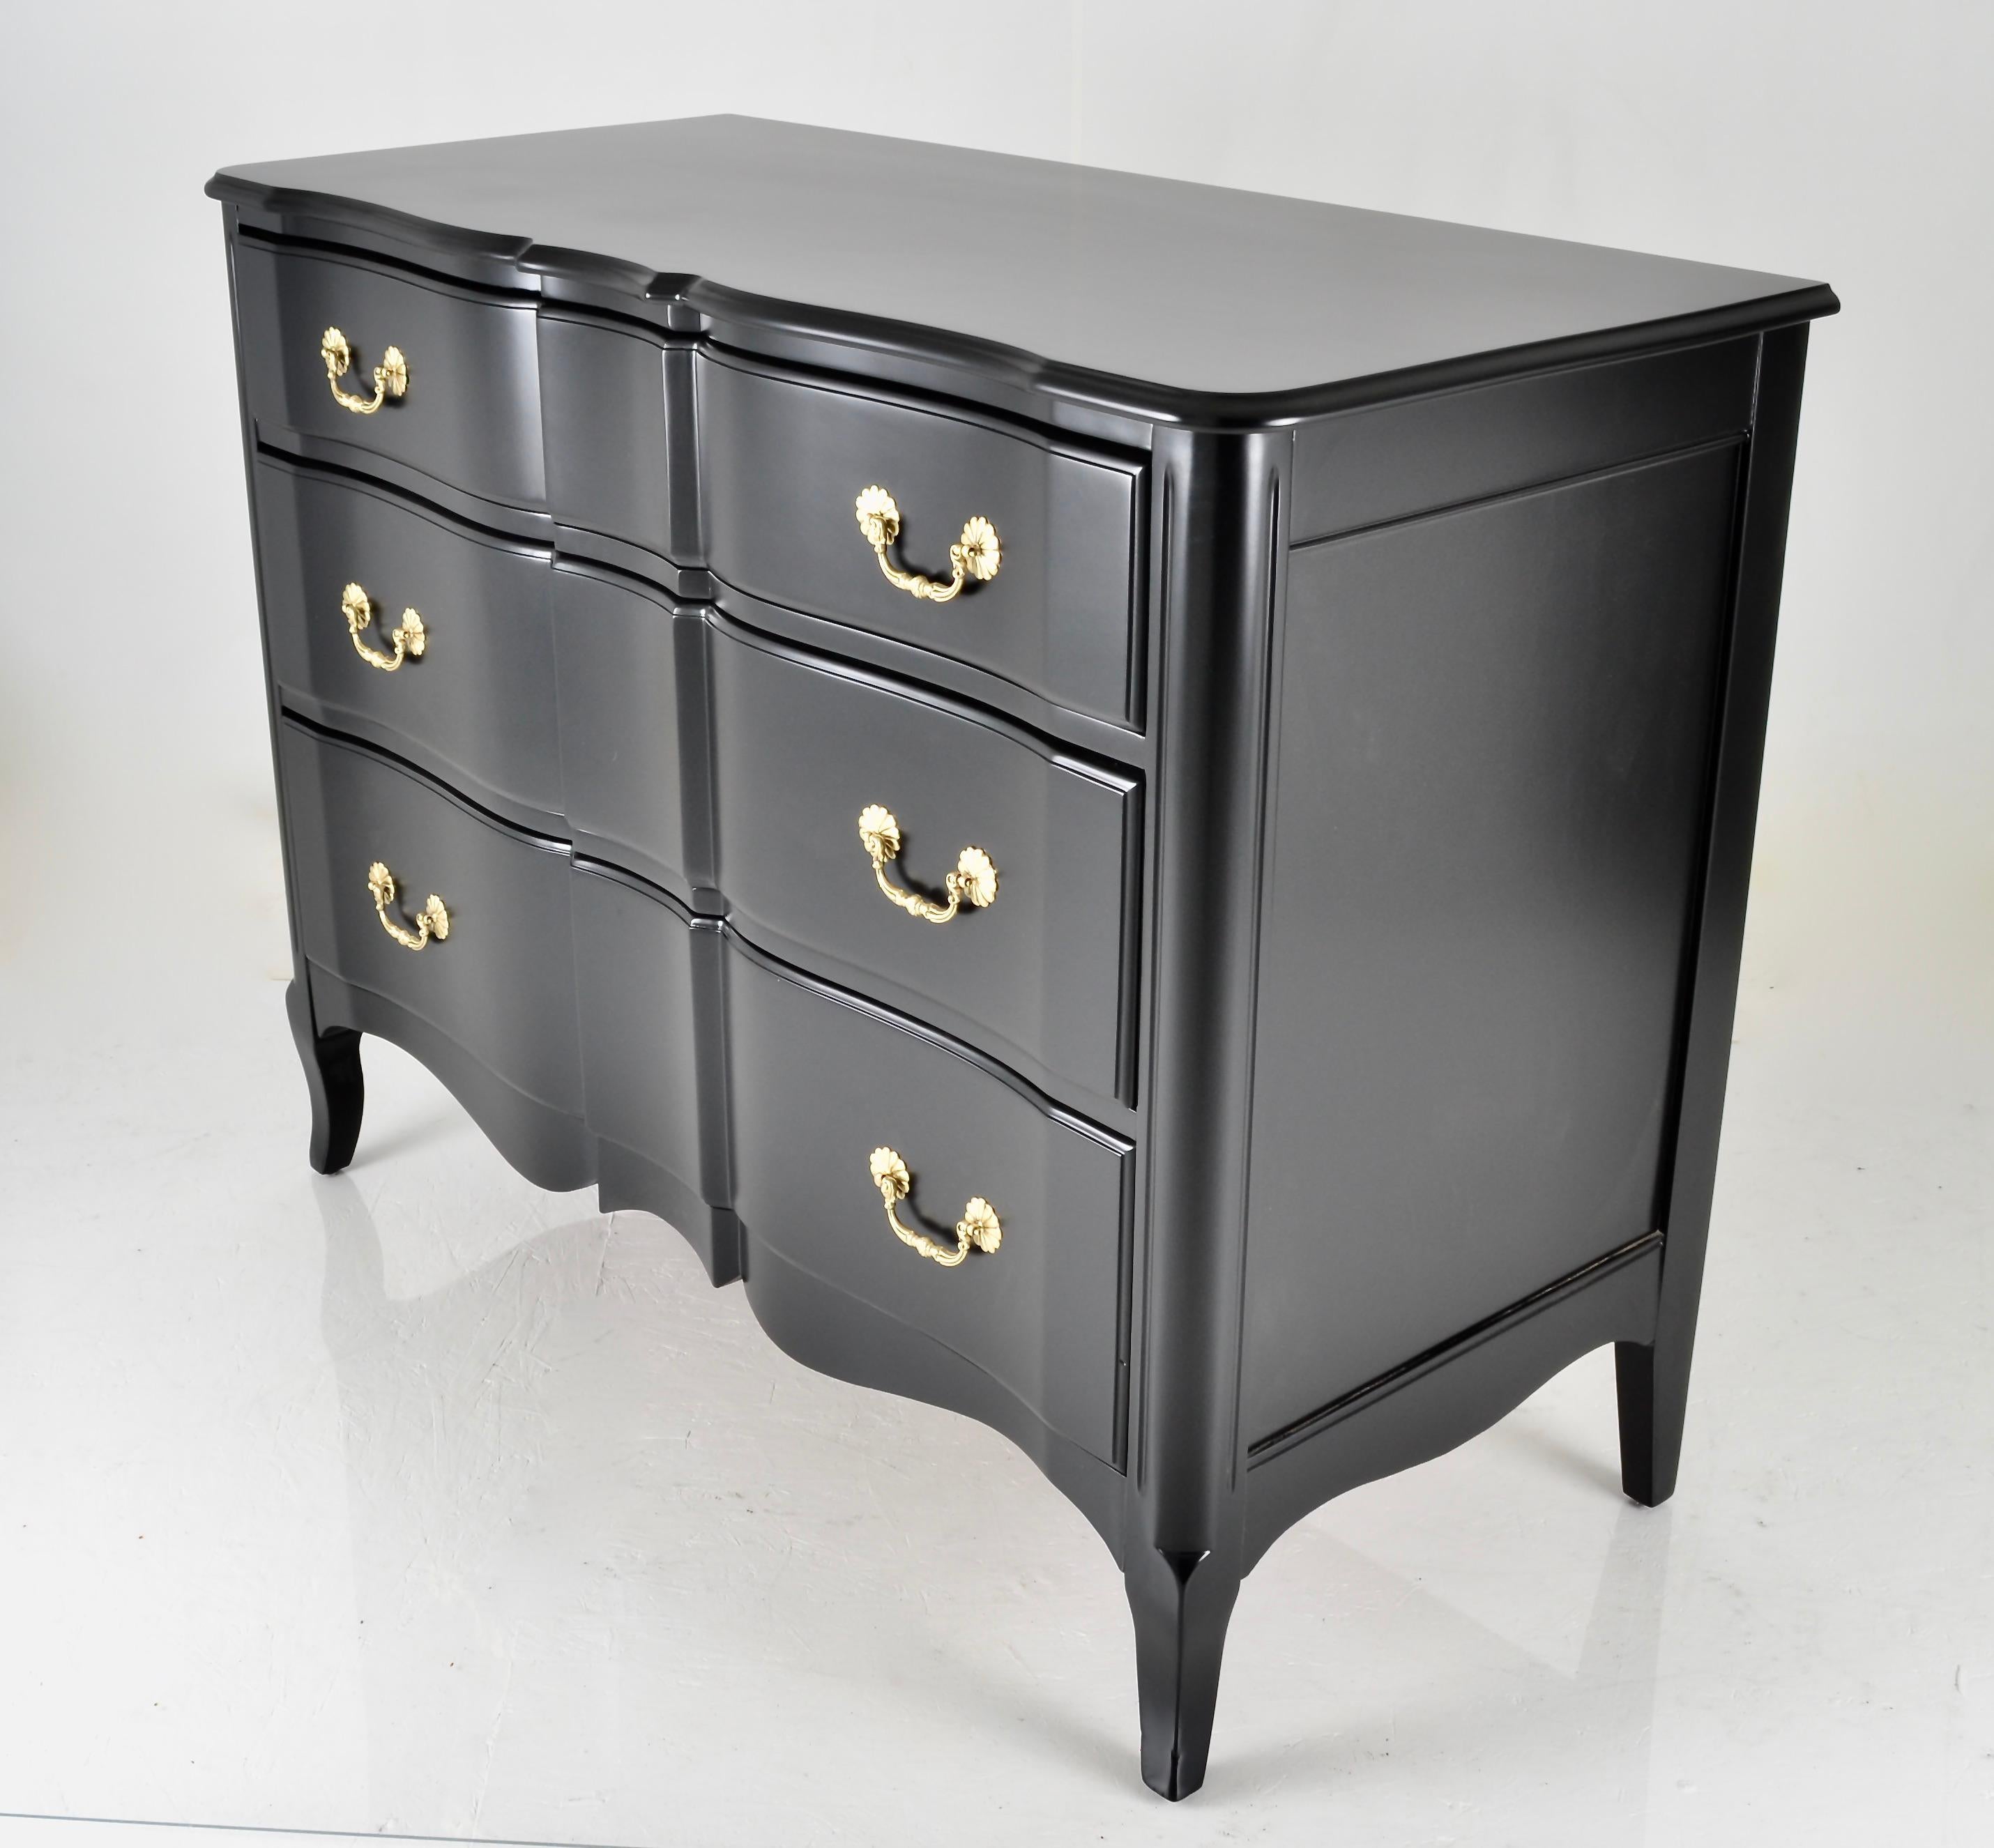 A classic form in this 3 drawer chest, with solid brass pulls. Fully restored in new satin black lacquer with polished and sealed pulls. Quality construction, solid oak drawers, dovetailed.